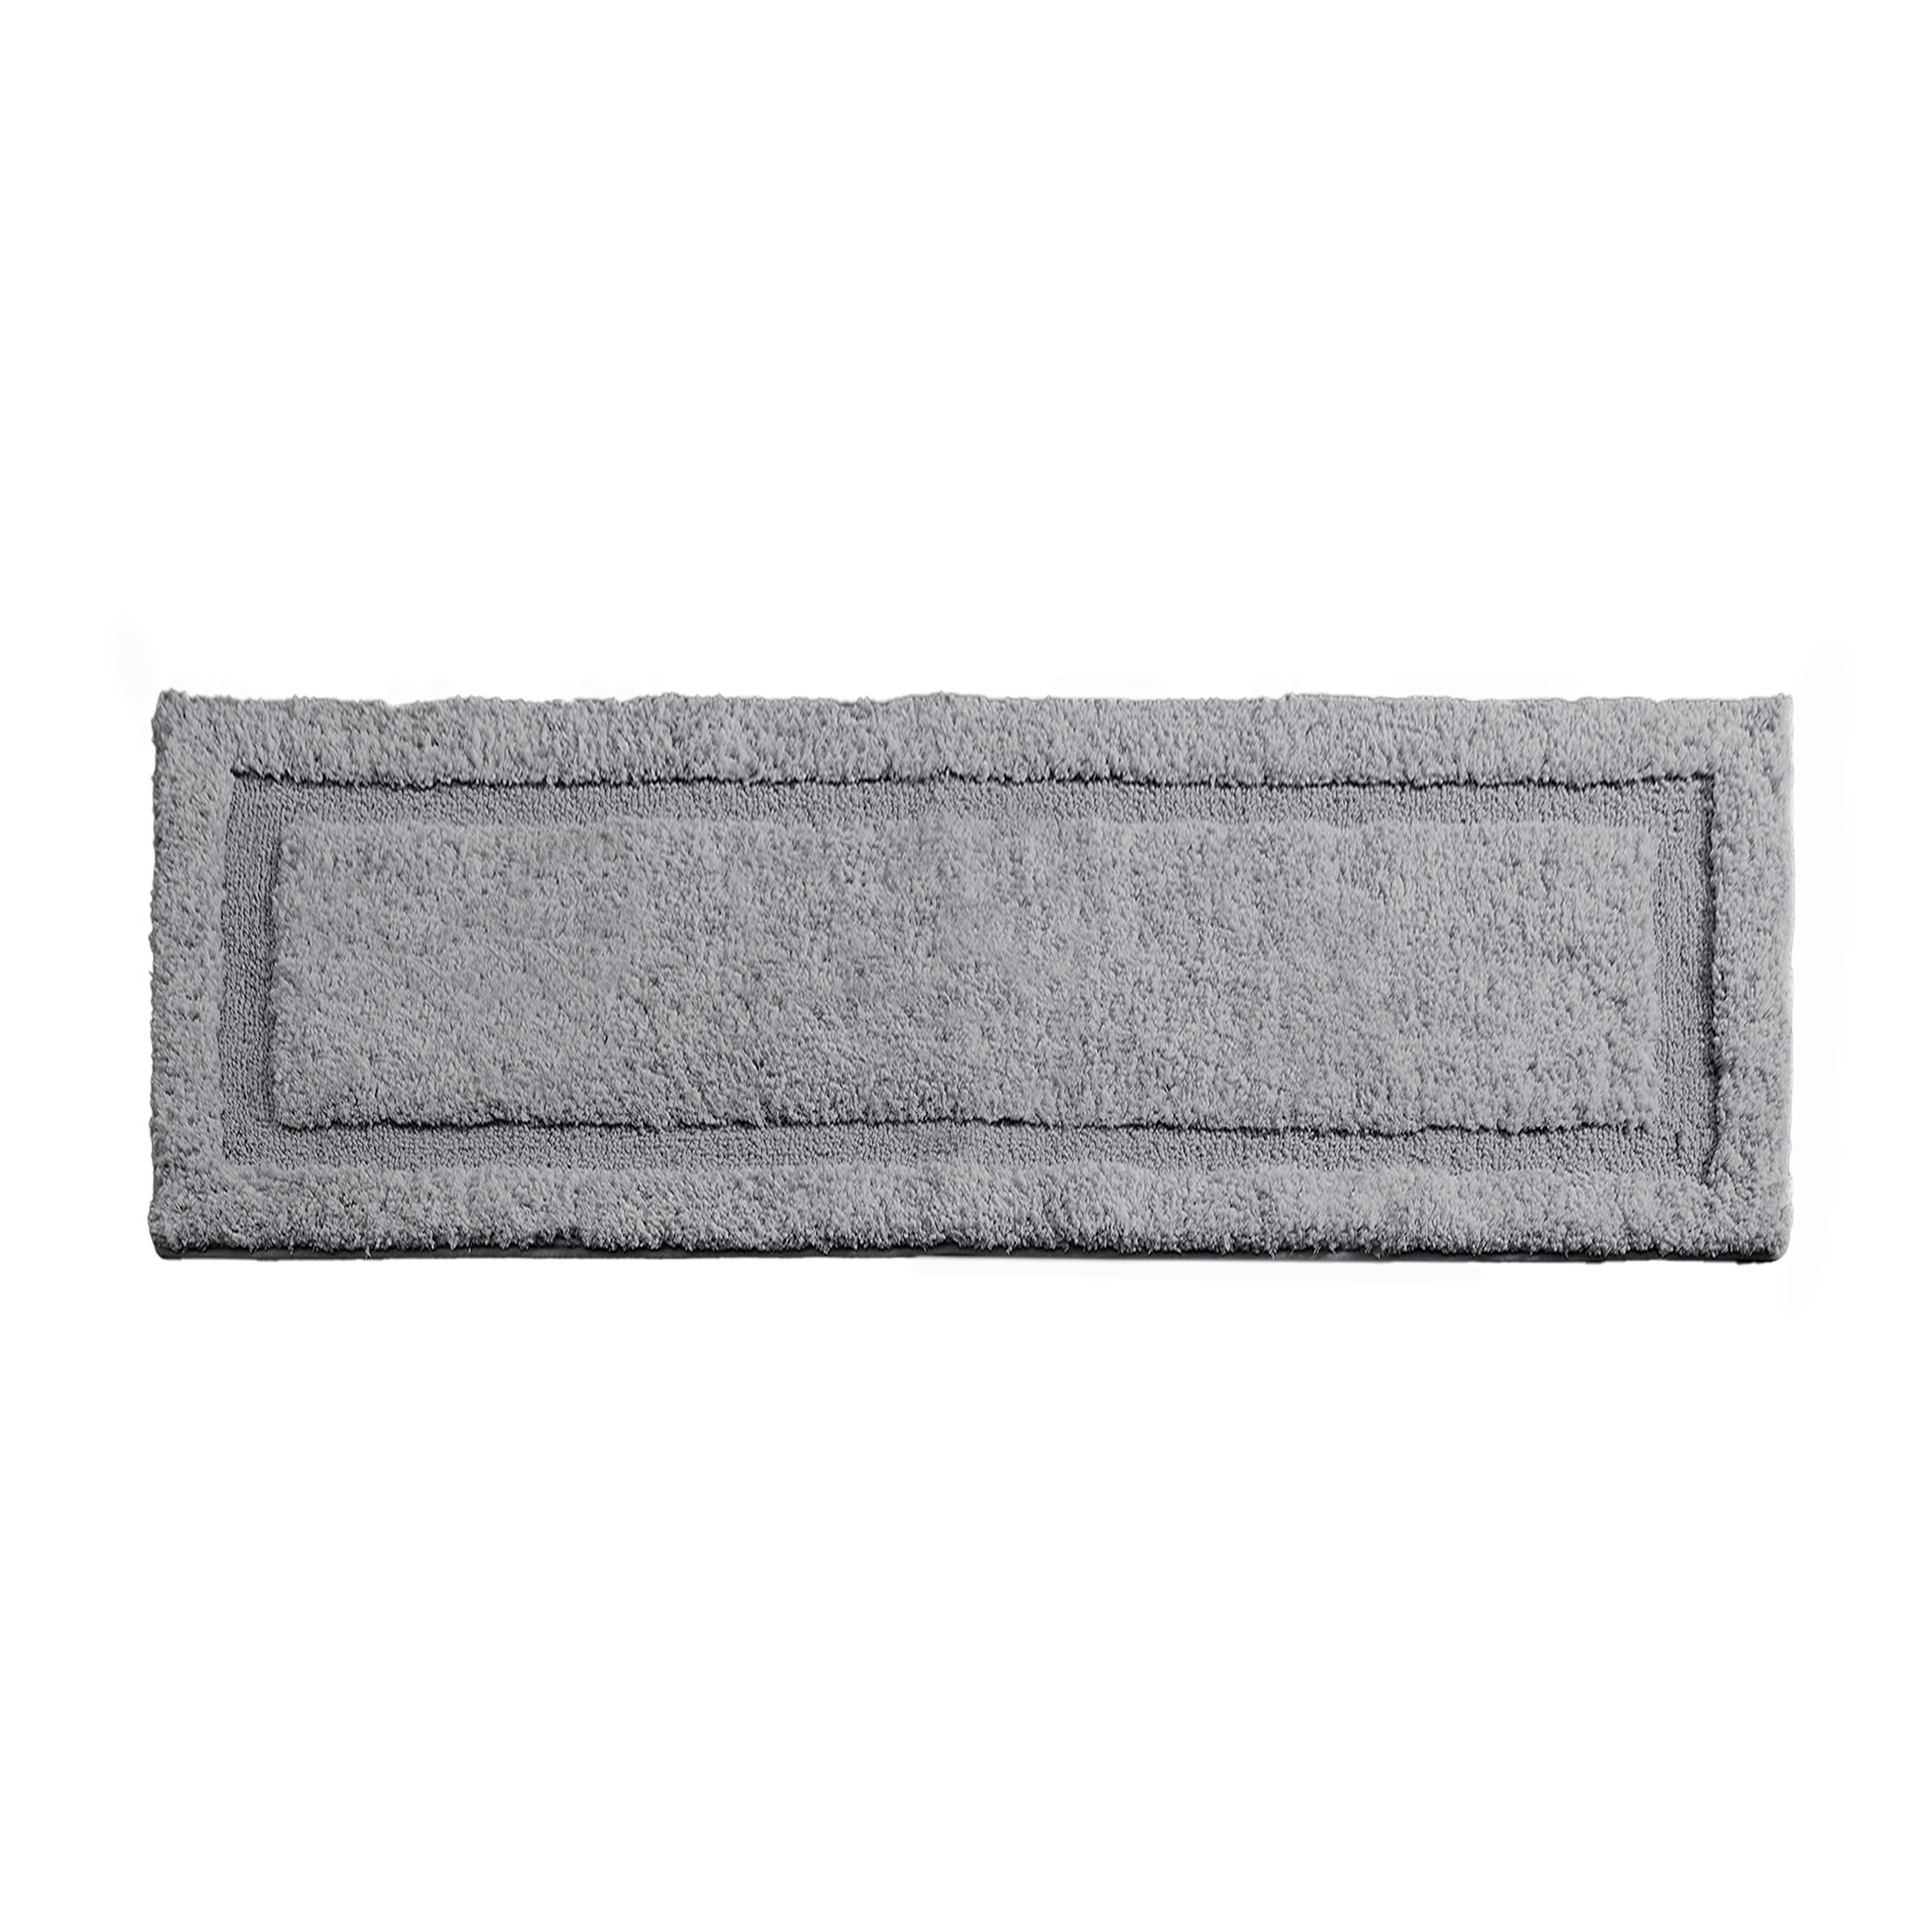 https://ak1.ostkcdn.com/images/products/is/images/direct/ede0e65506910114fcf0aa987a32b7f6c4f31624/Home-Heathered-Hotel-Microfiber-Bath-Rug-Runner.jpg